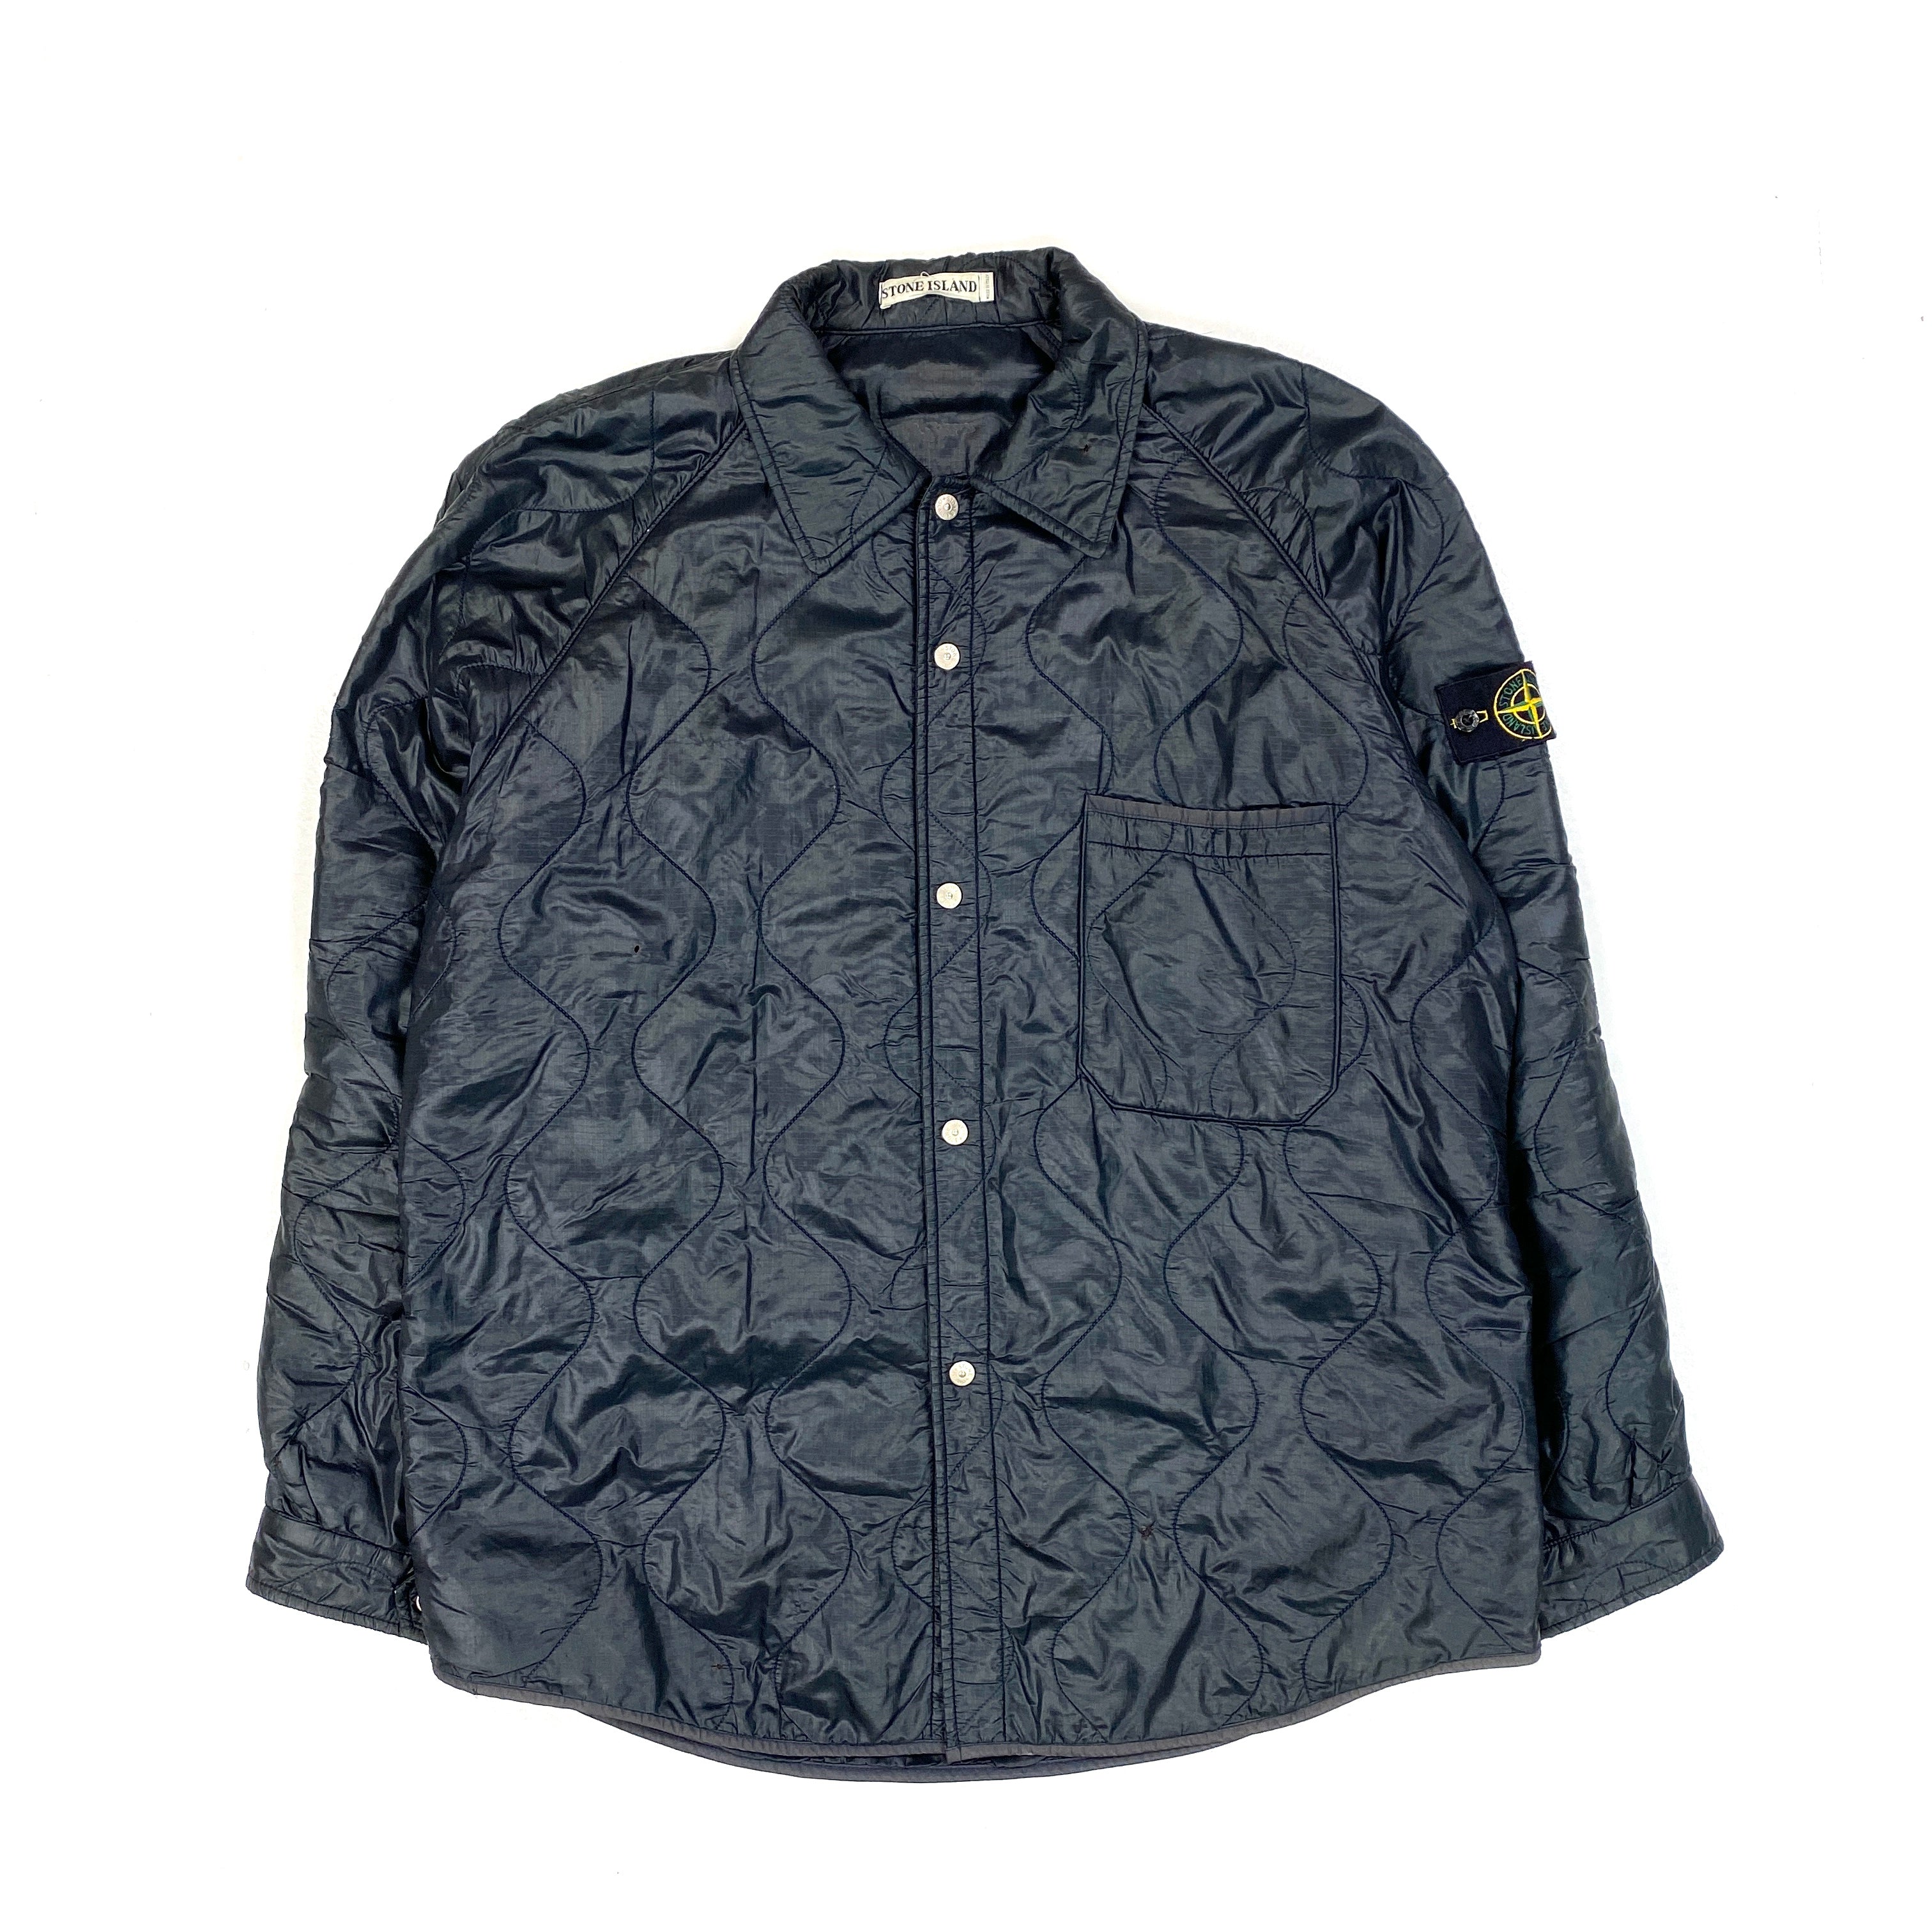 Stone Island AW/1998 Vintage Quilted Nylon Shirt – Mat's Island